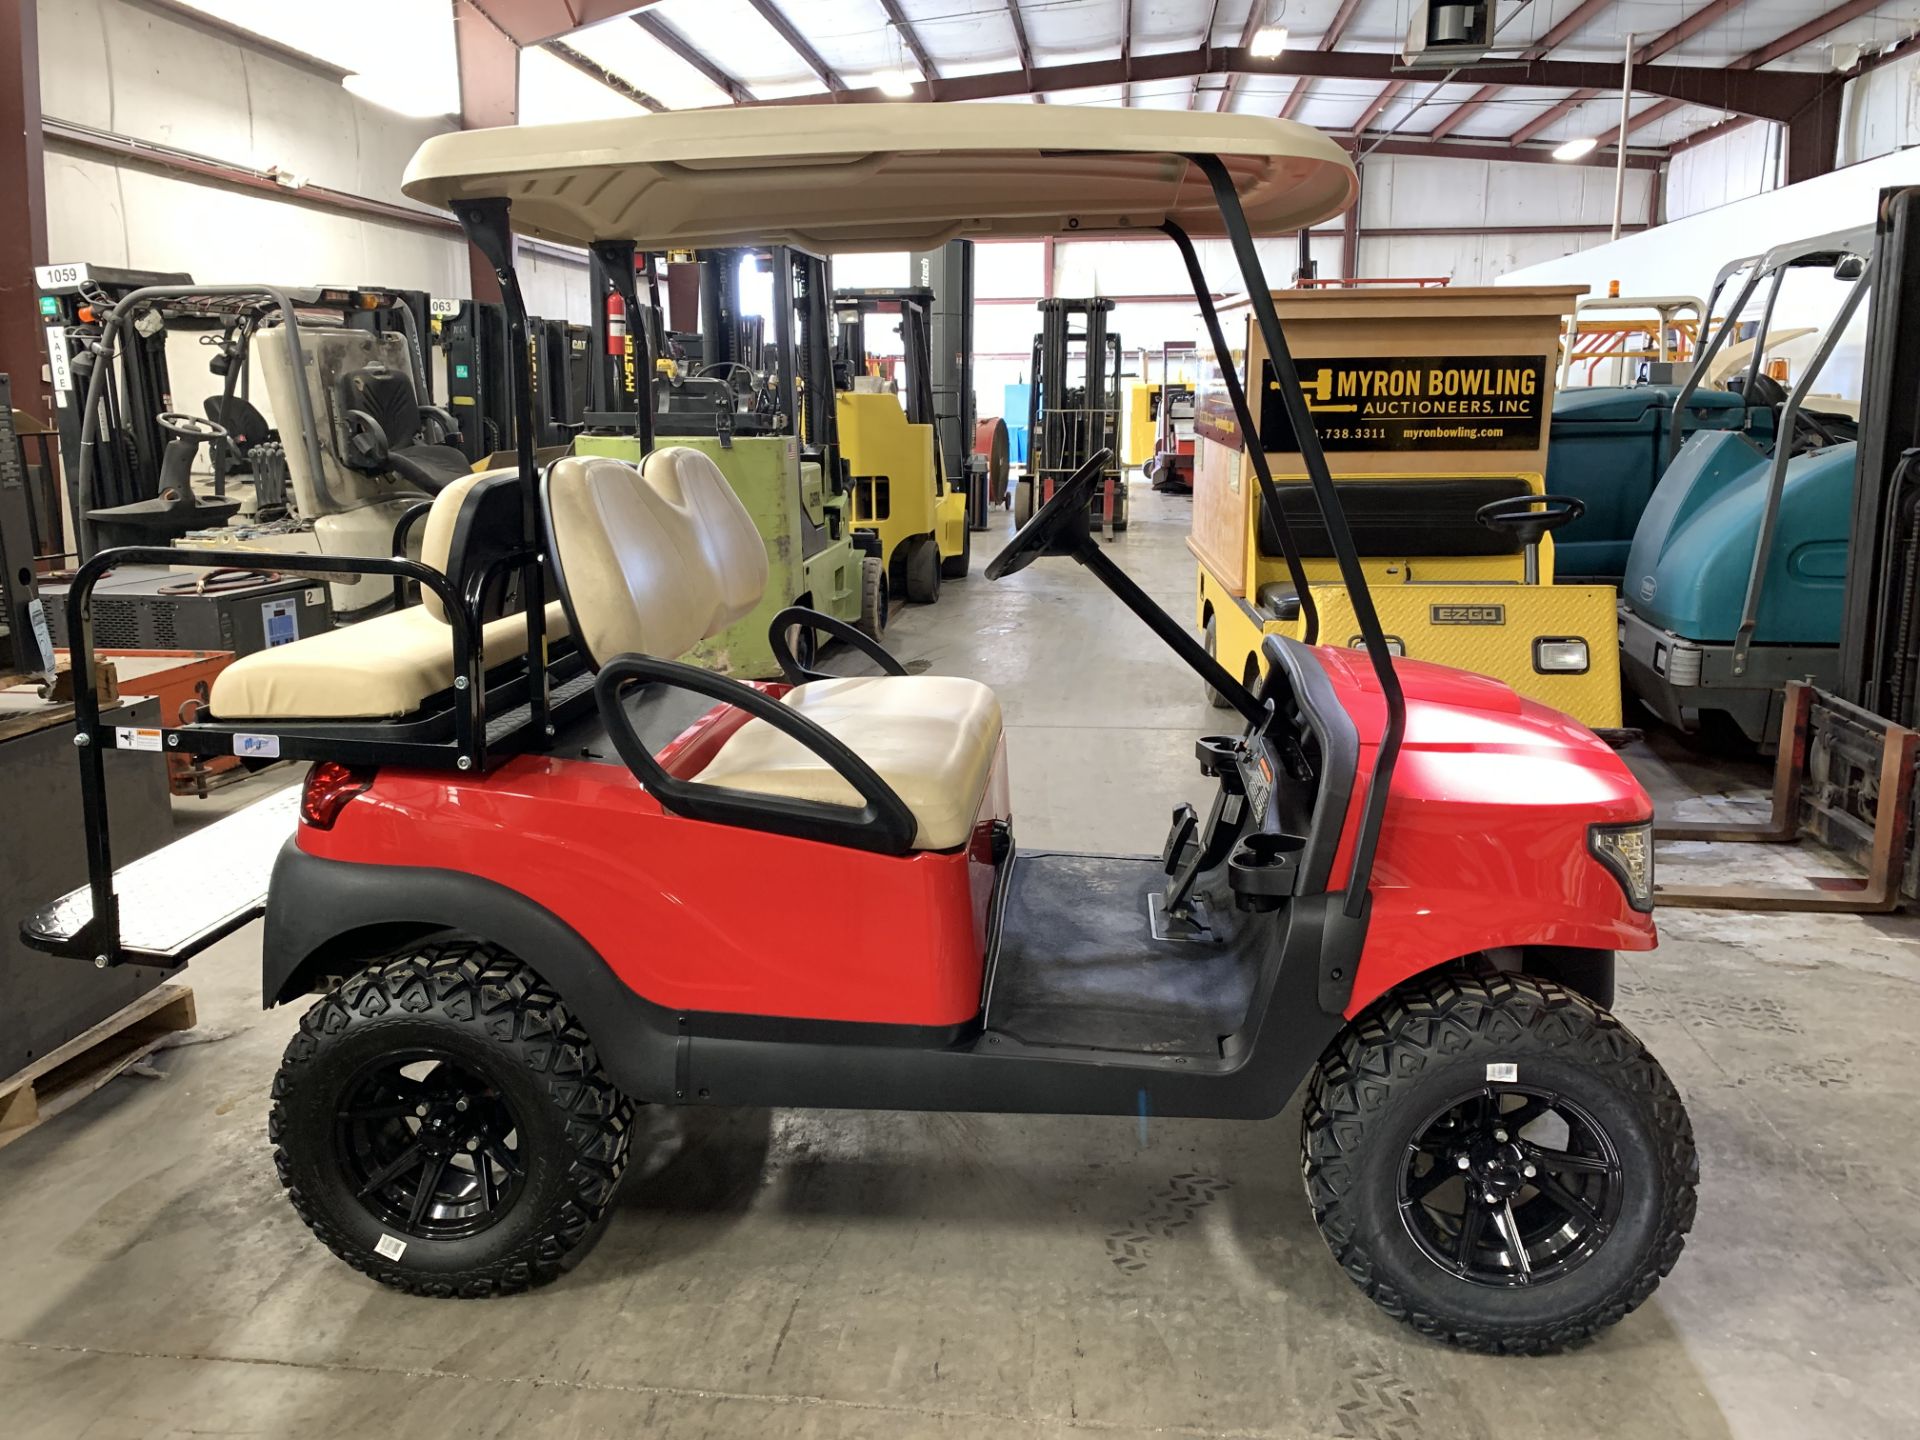 2014 CLUB CAR PRECEDENT ELECTRIC GOLF CART, WITH 48 VOLT CHARGER, 4-PASSENGER FOLD DOWN SEAT